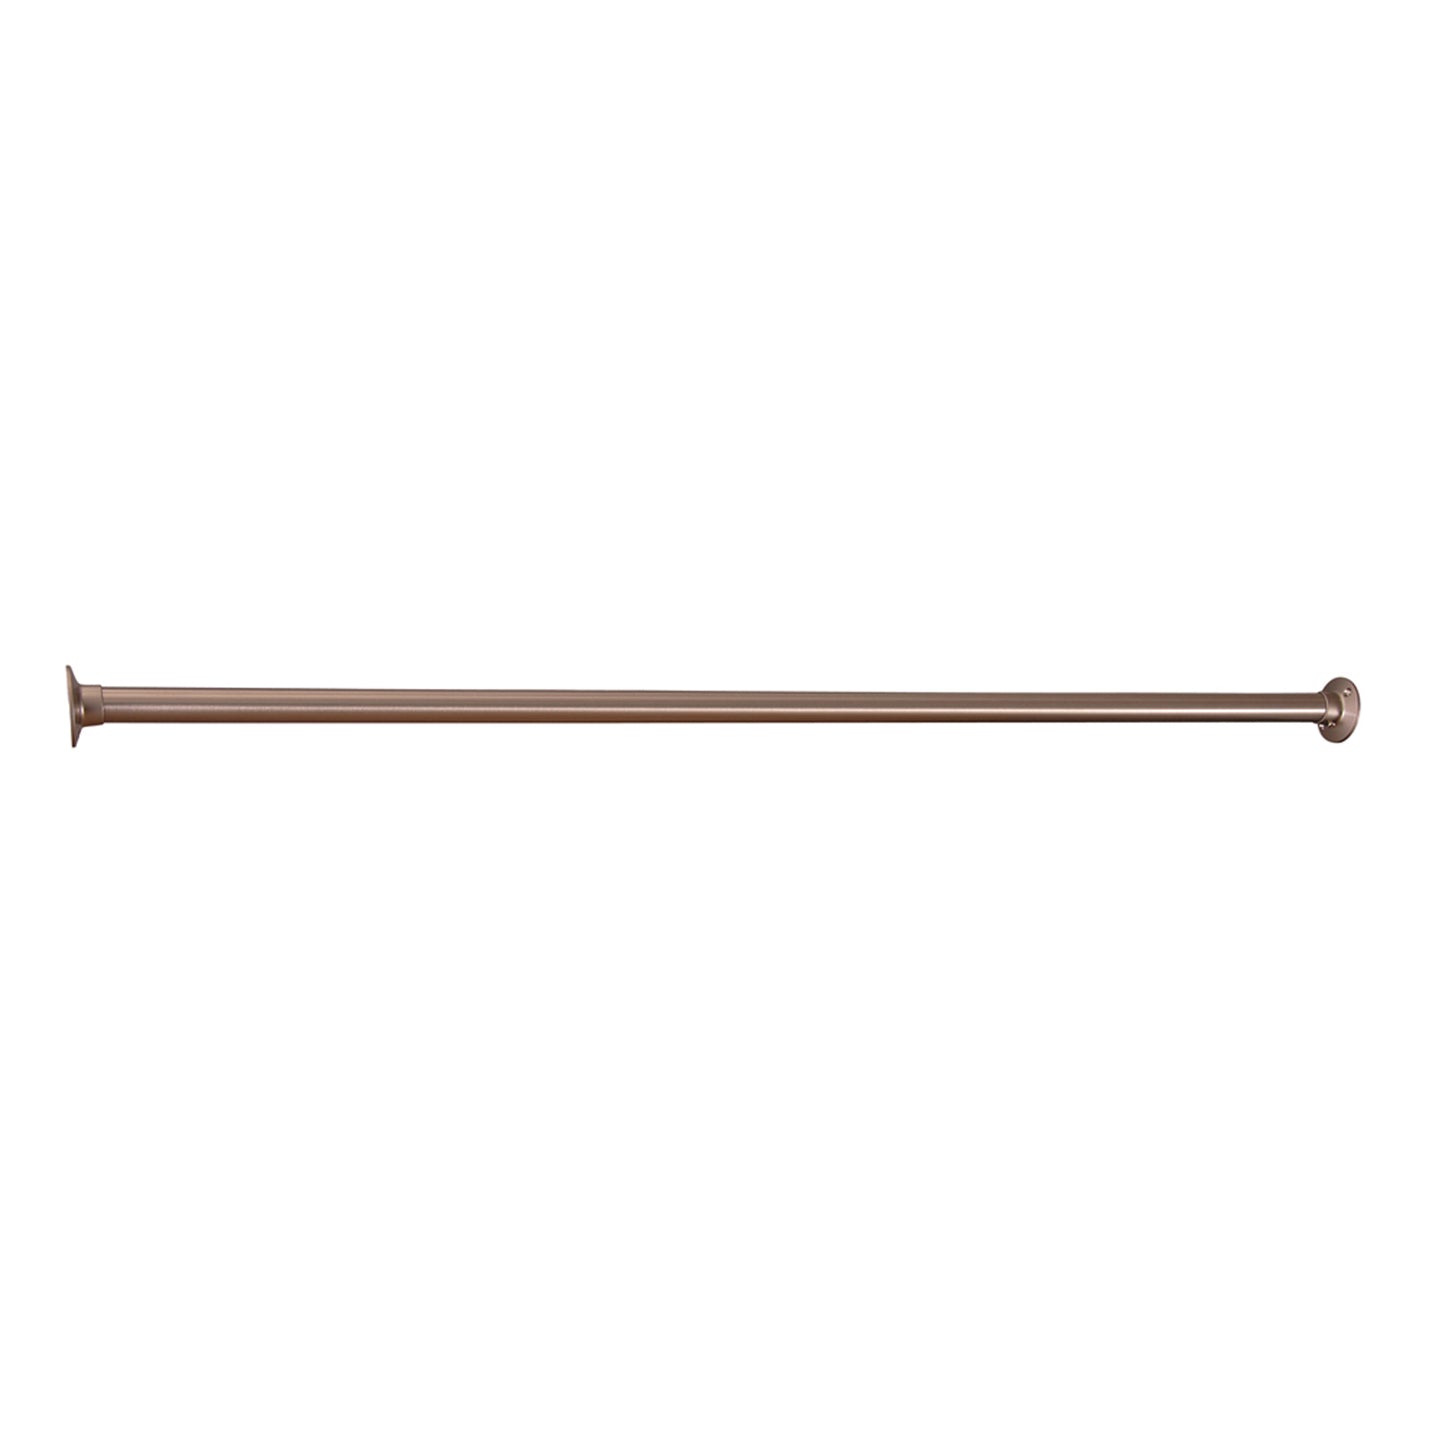 84" Straight Shower Rod in Brushed Nickel